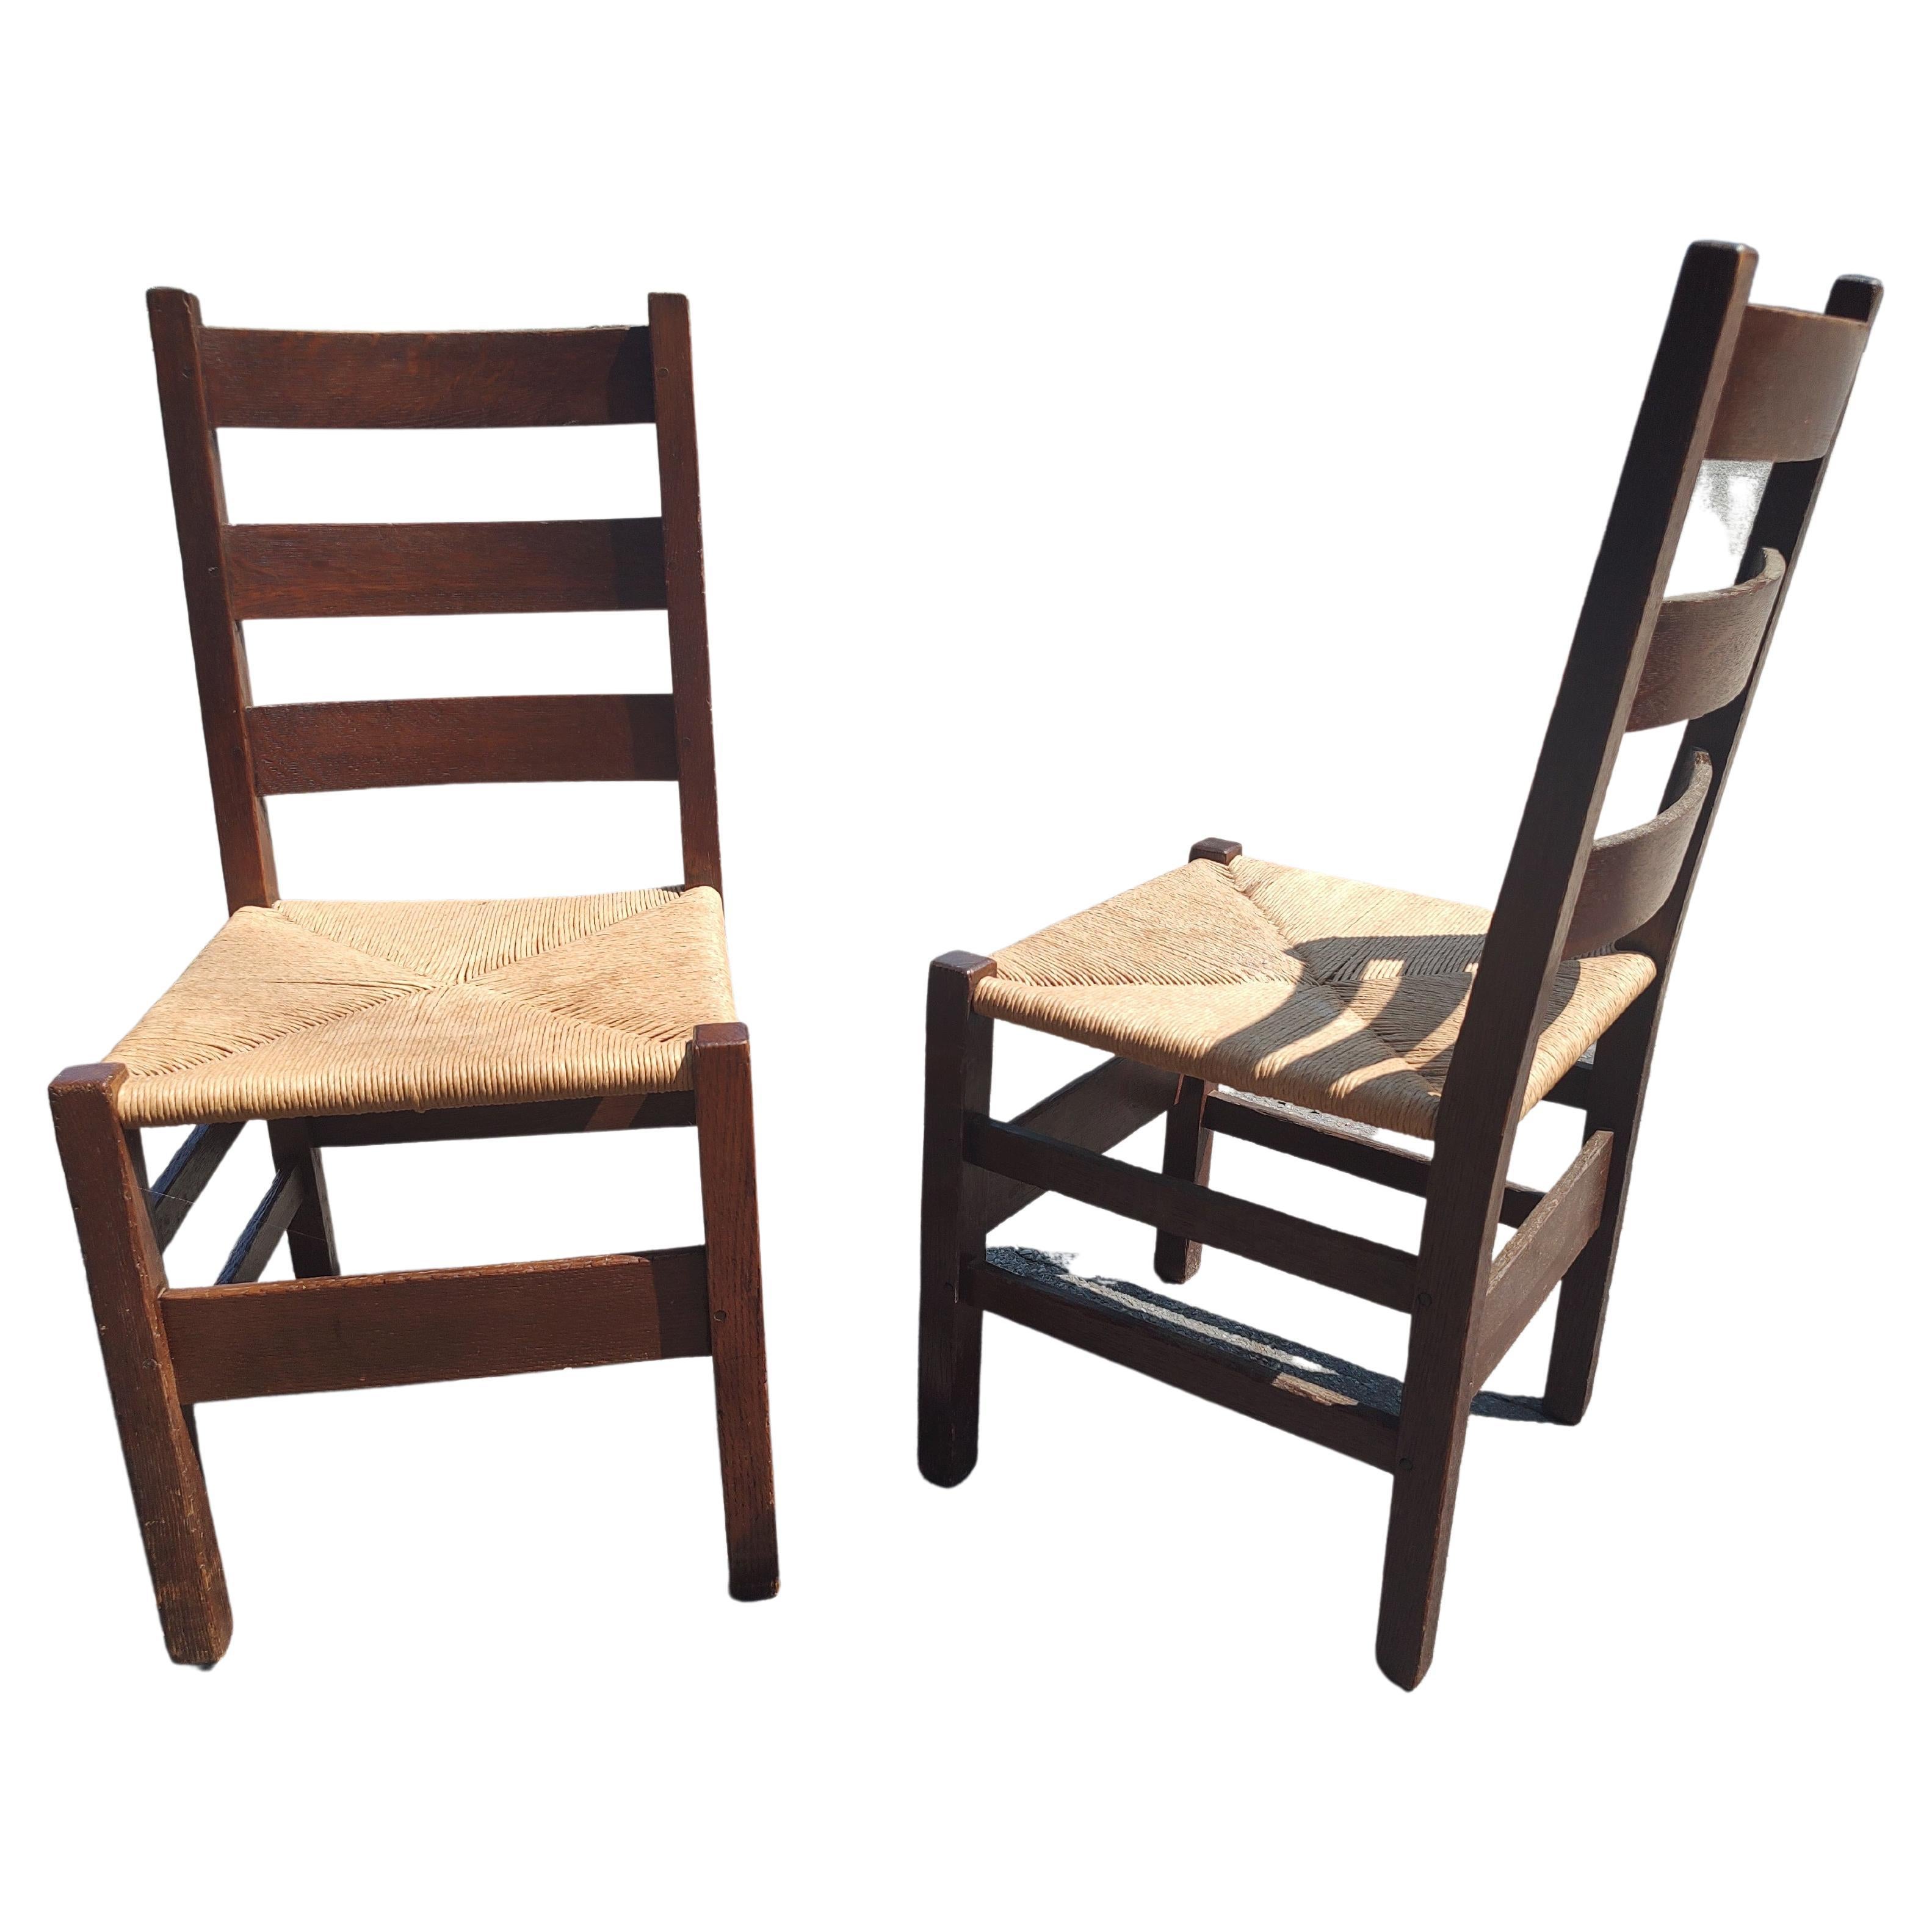 Pair of Arts & Crafts Mission Oak Side Chairs by Gustav Stickley C1910 In Good Condition For Sale In Port Jervis, NY